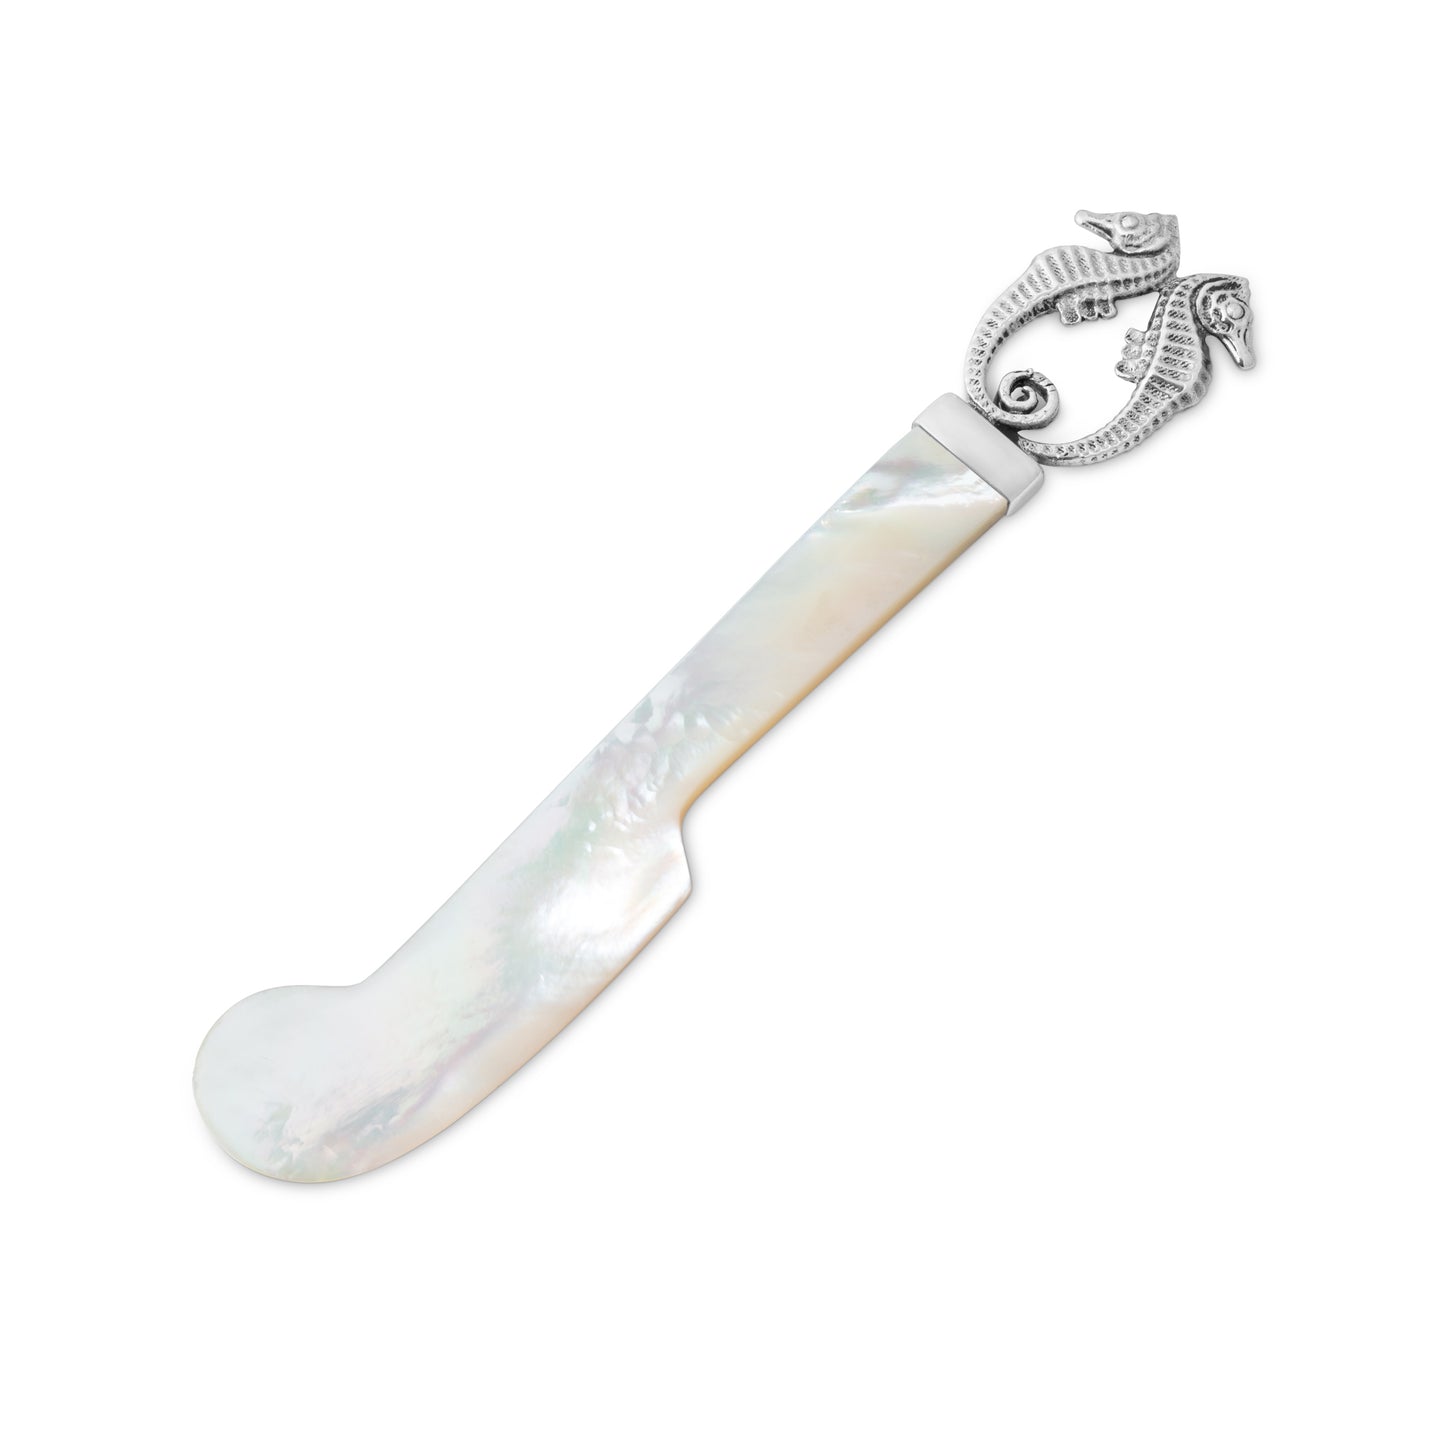 Seahorse Caviar Spreader in Sterling Silver & Mother of Pearl